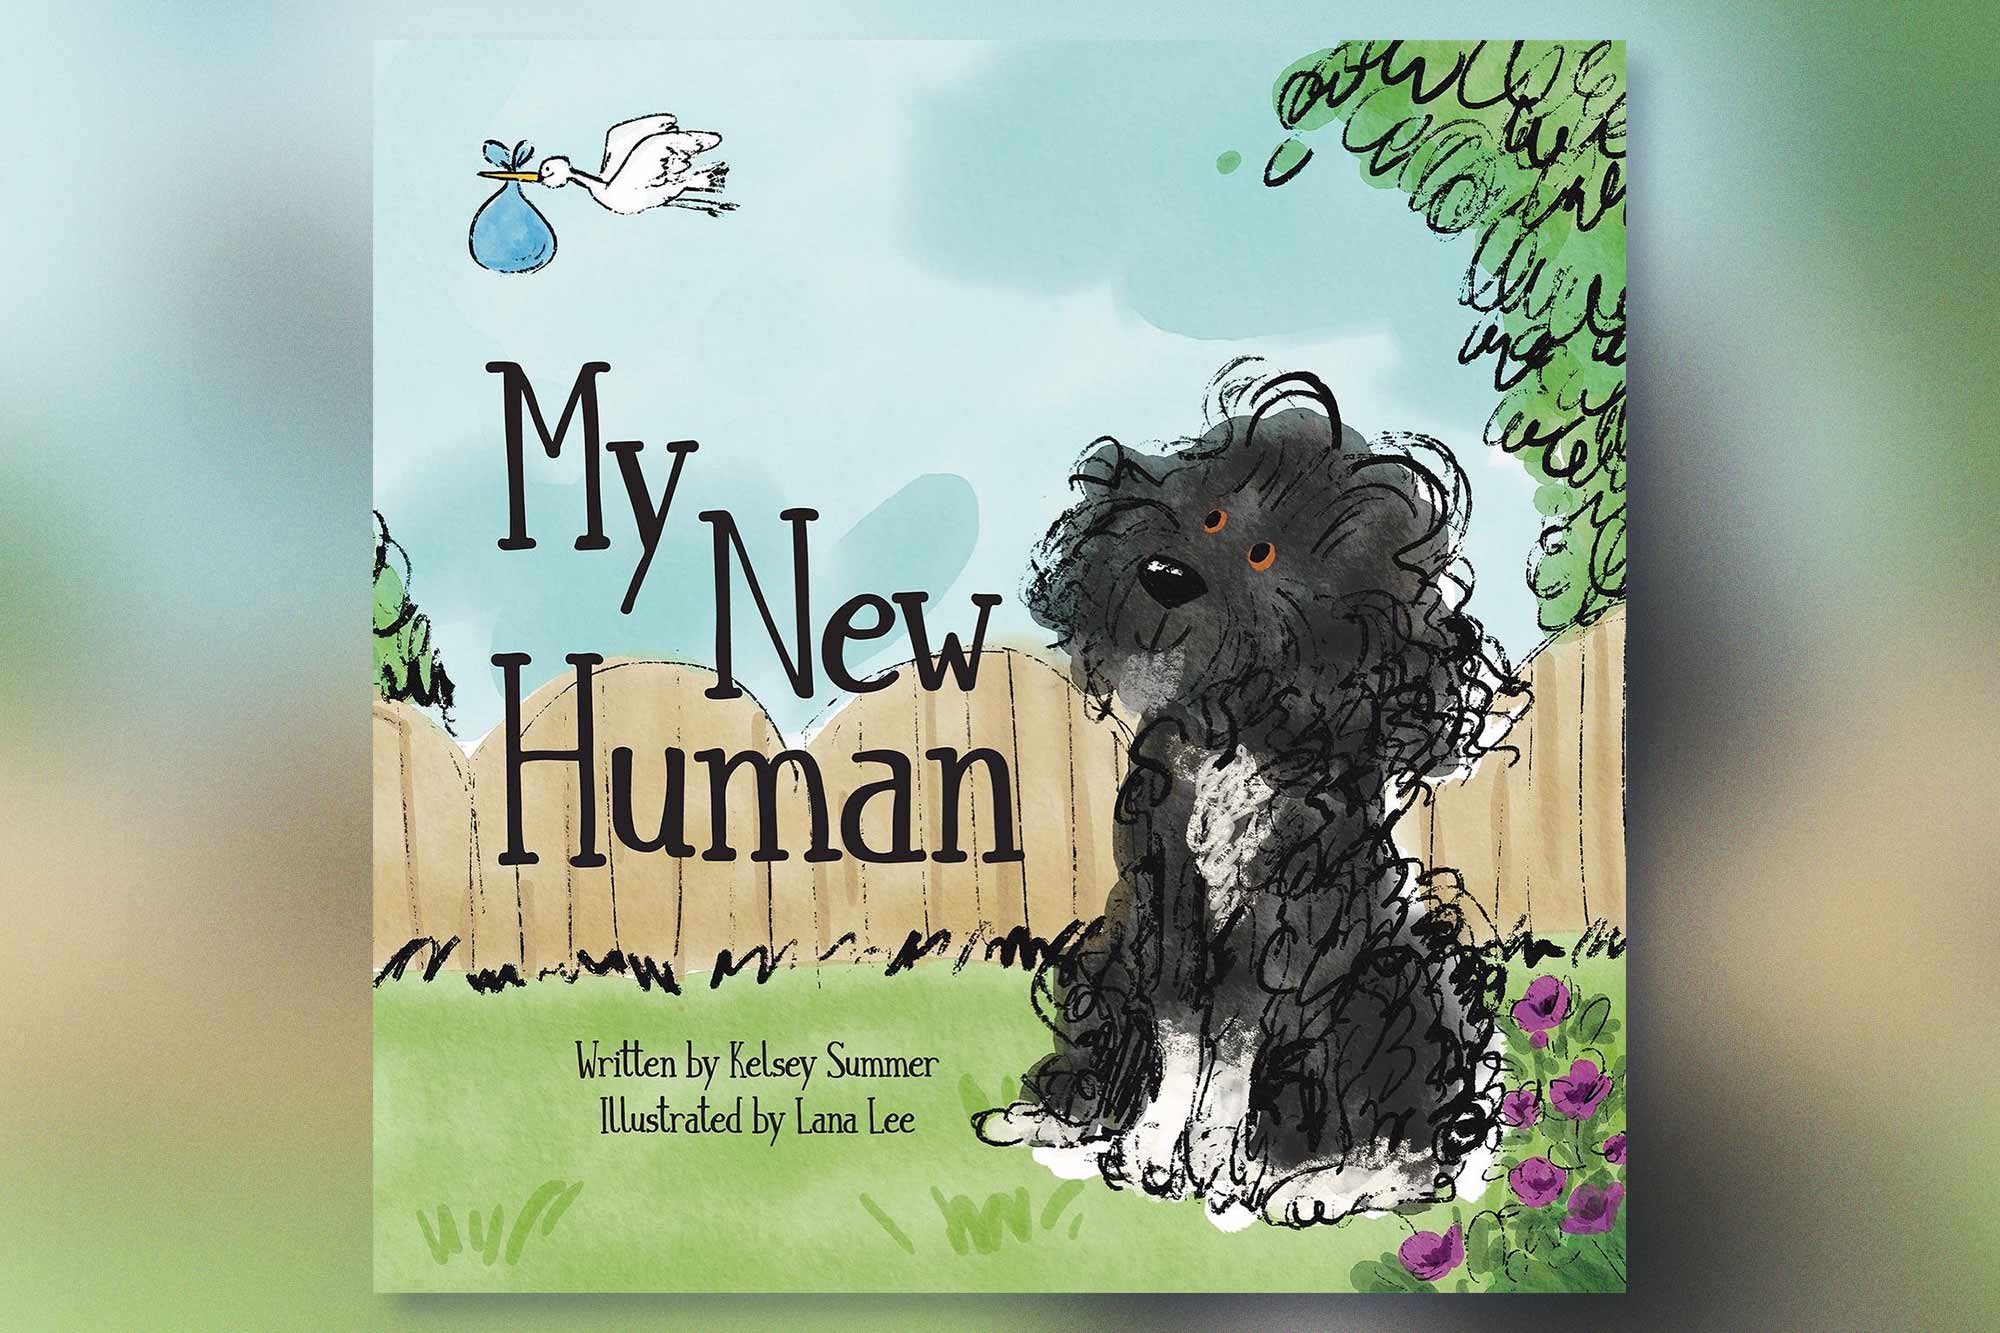 An image of the "My New Human" book, with a Labradoodle on the cover